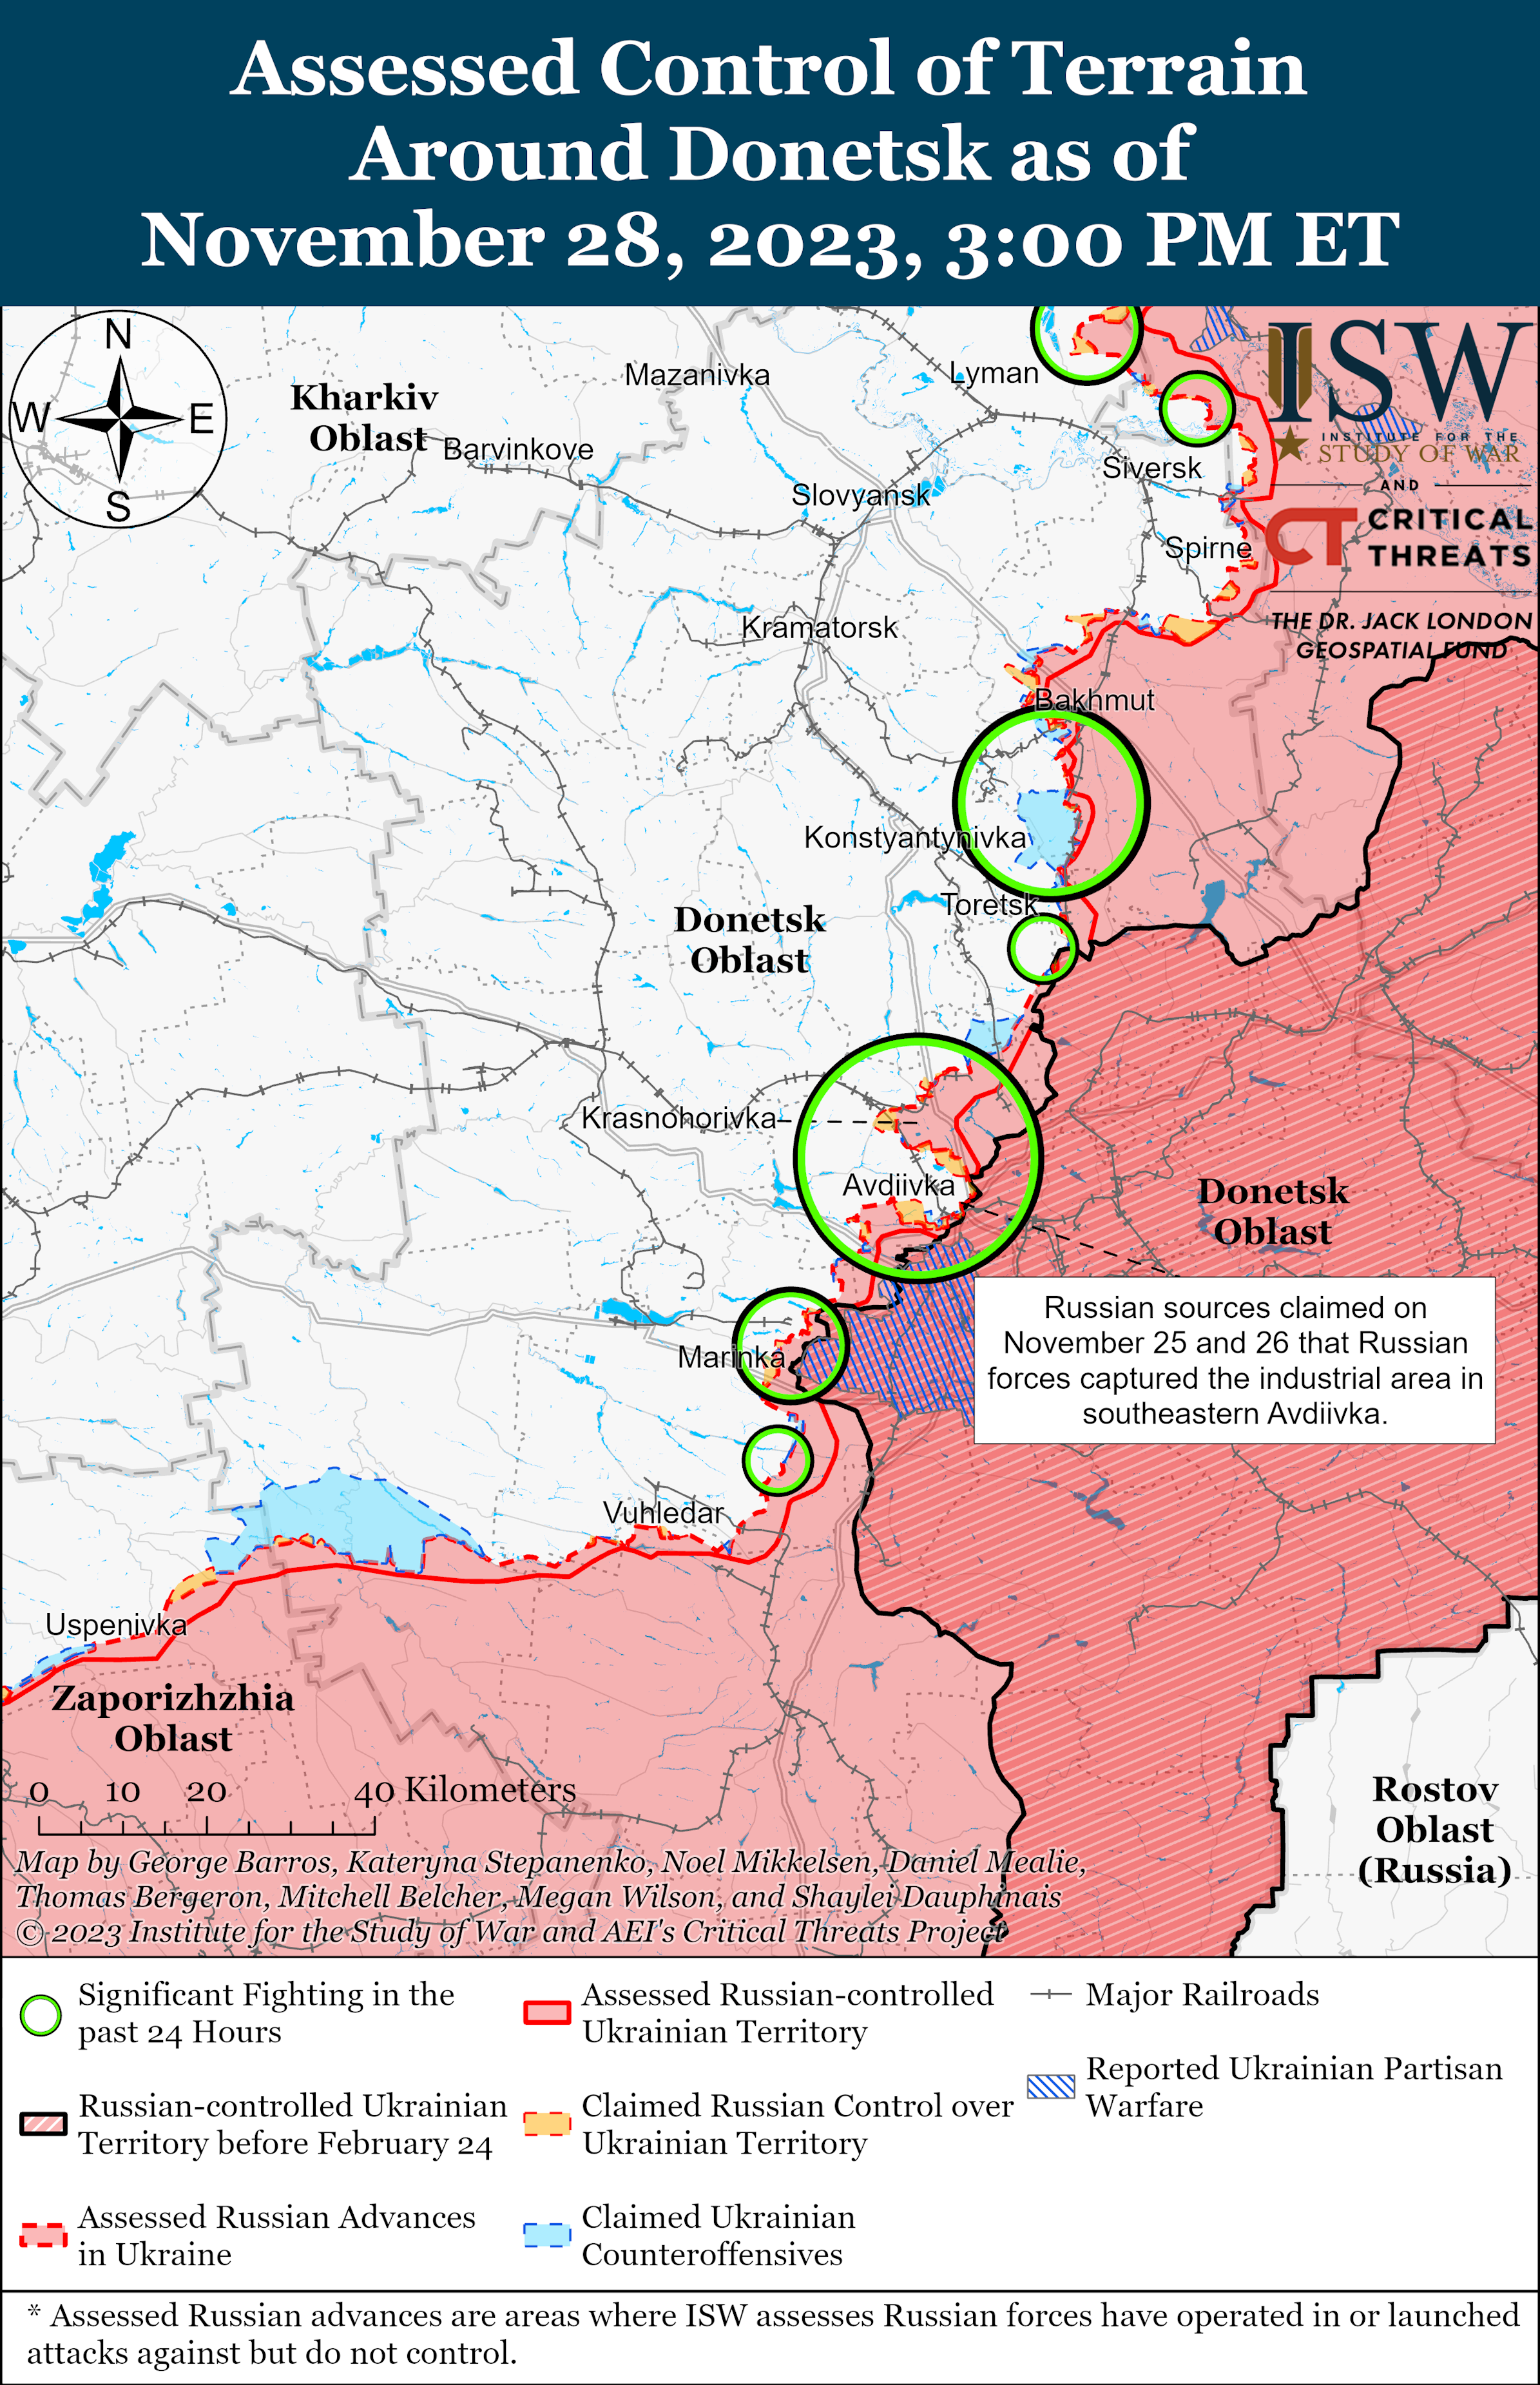 maps show russian advances in avdiivka after suffering major losses